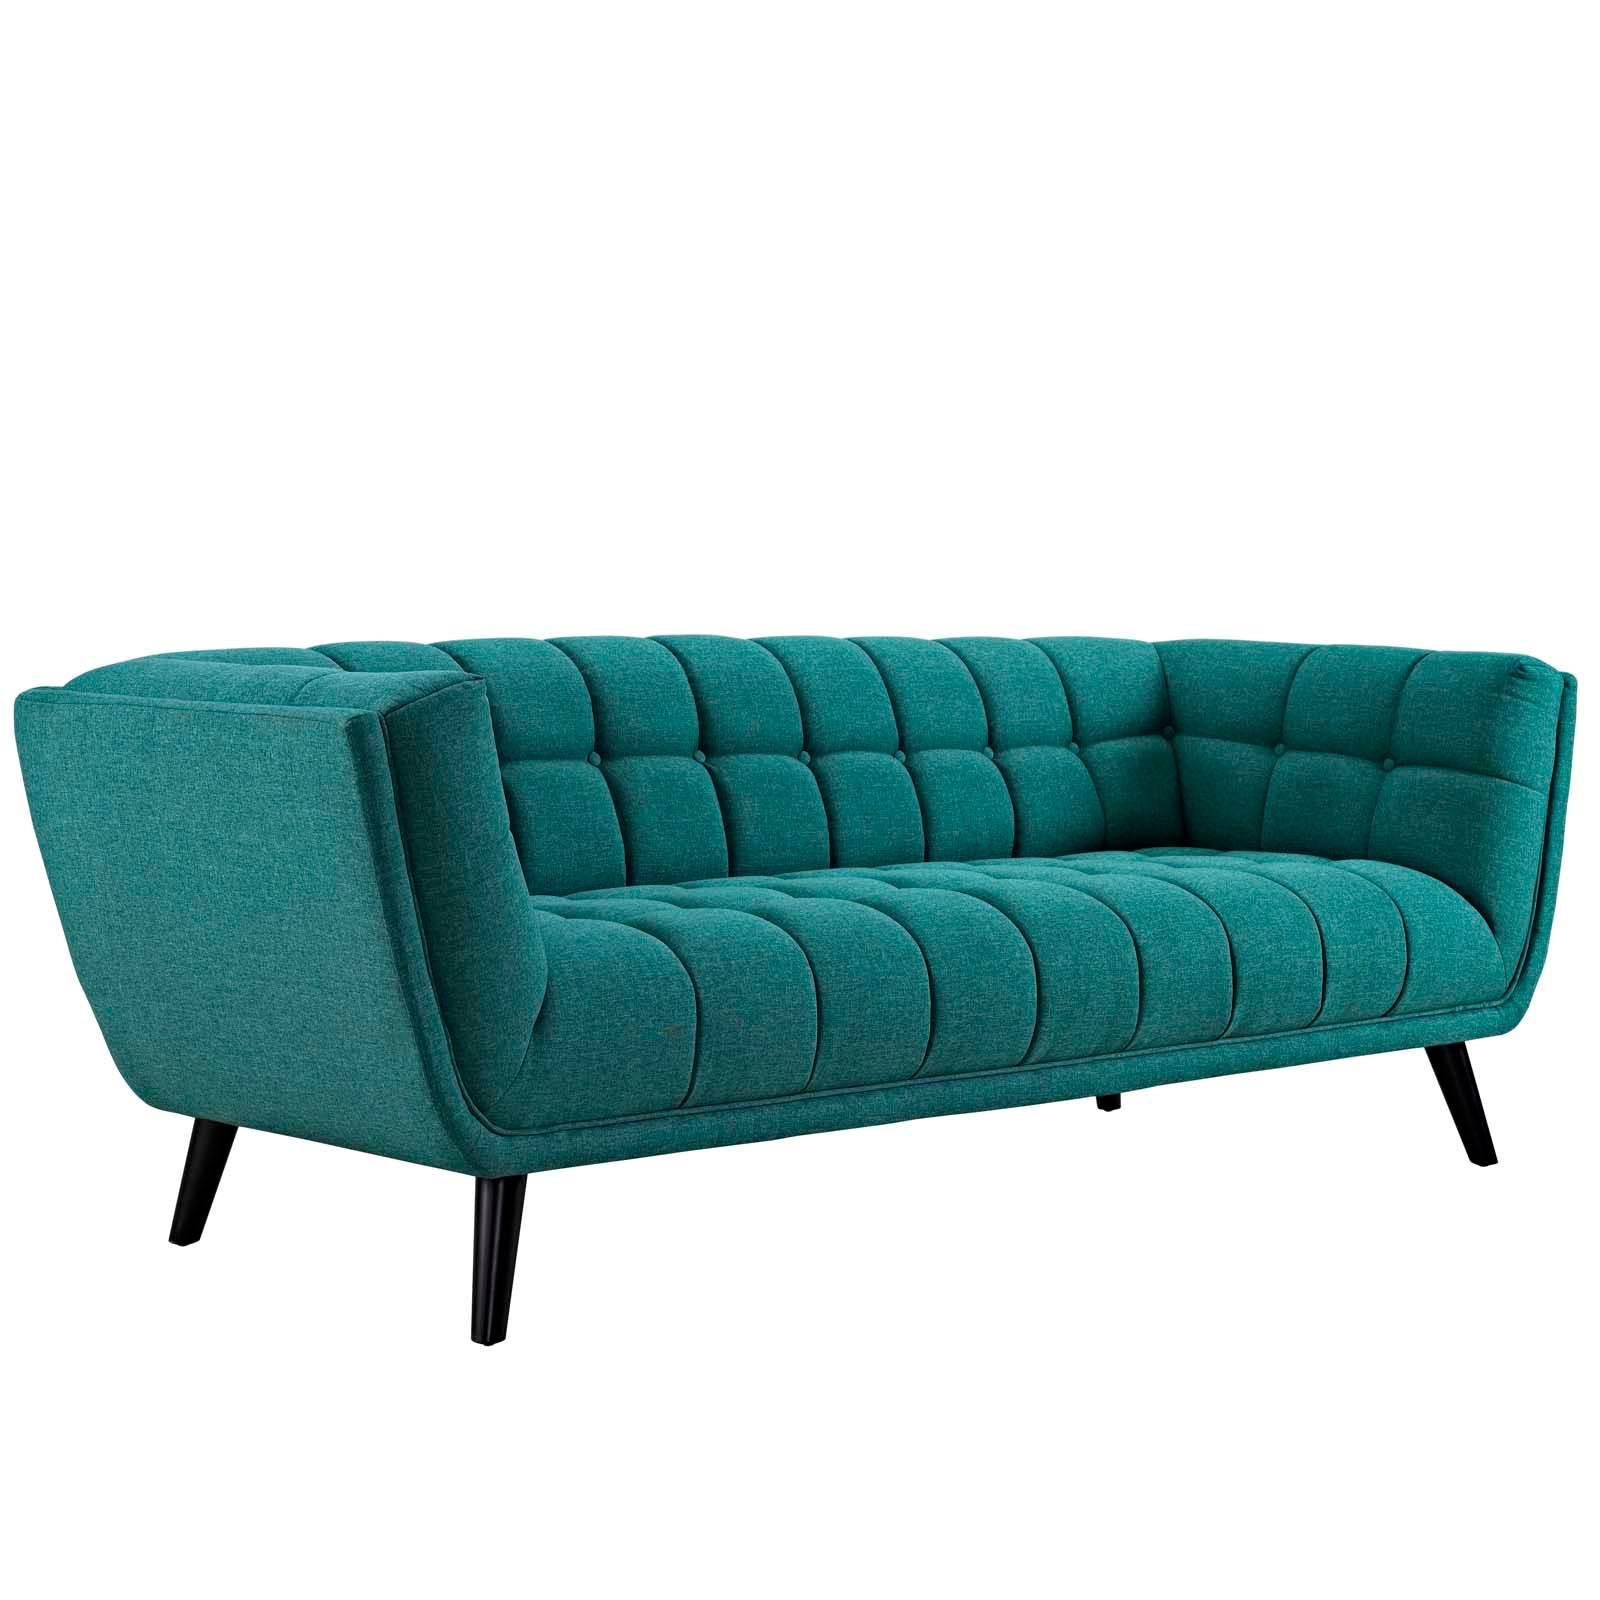 Modway Living Room Sets - Bestow 2 Piece Sofa and Armchair Set Teal